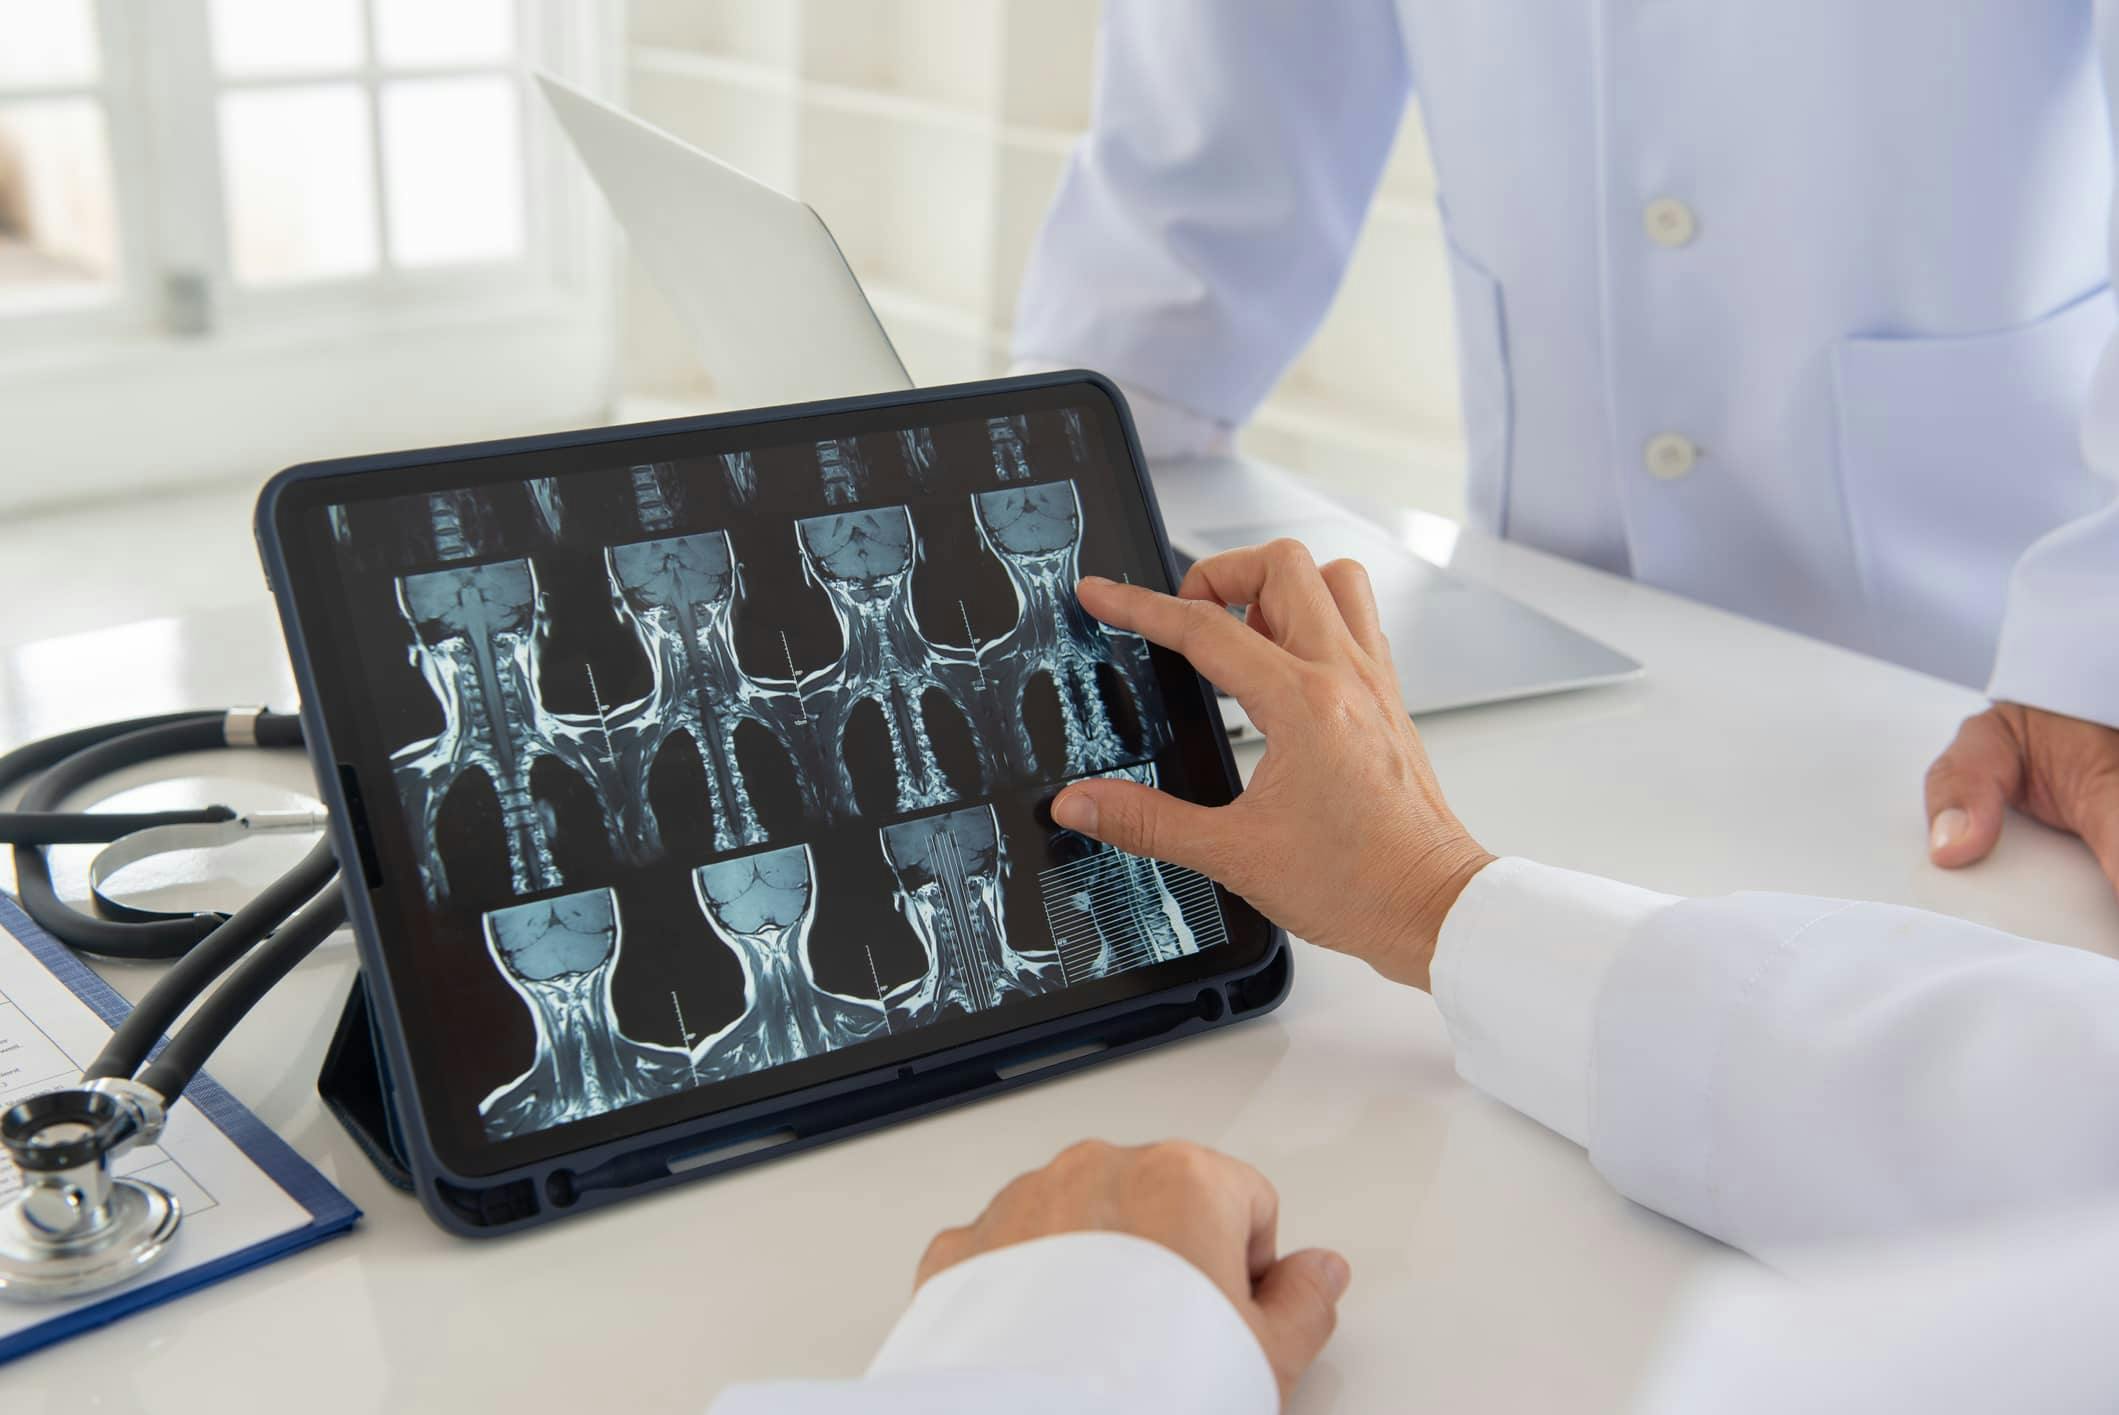 x-ray images of the spine on a tablet